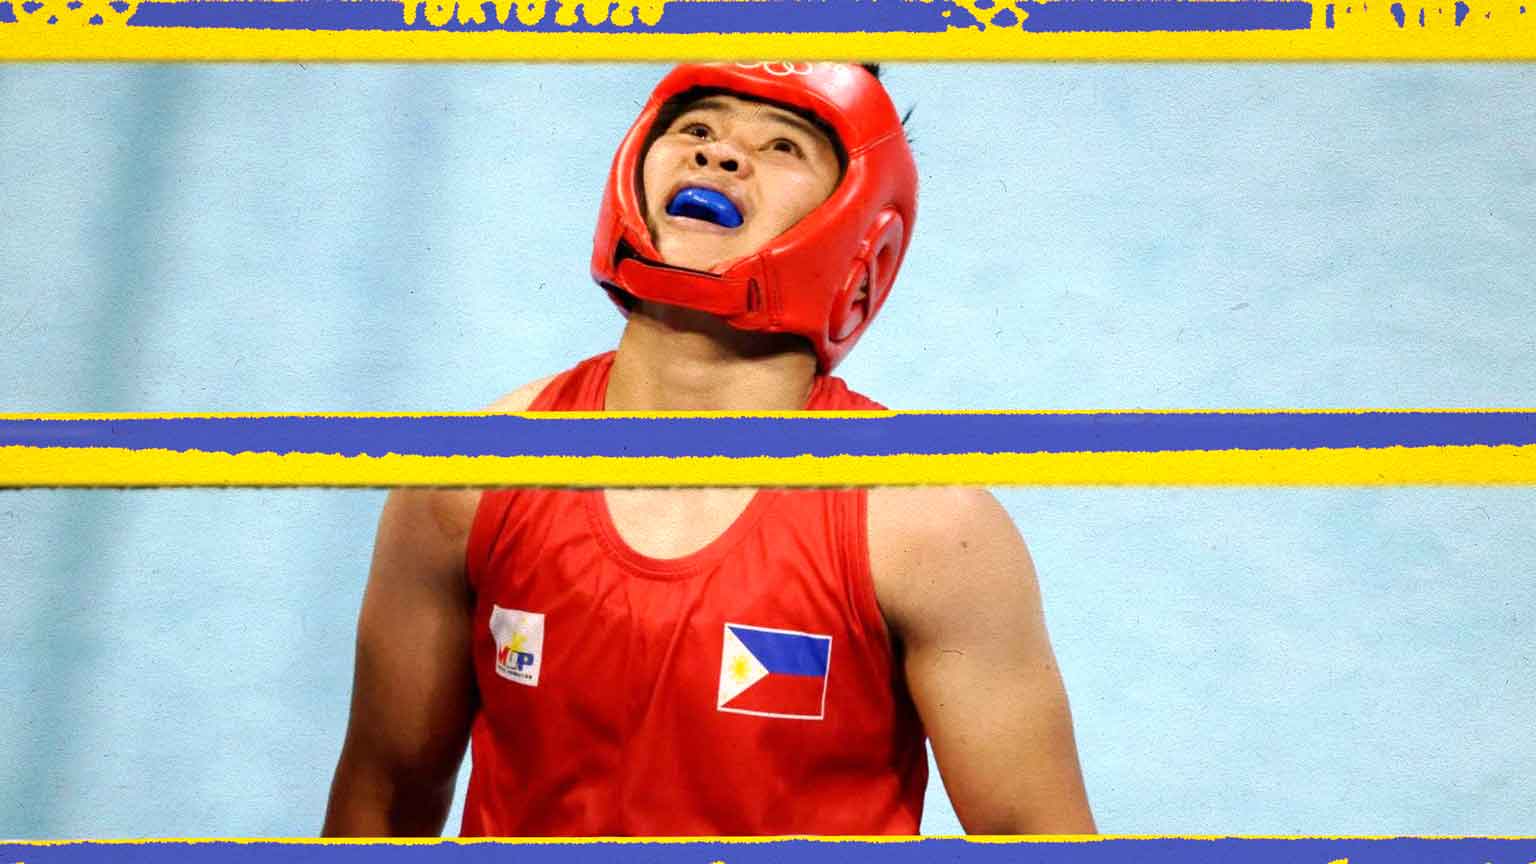 NESTHY PETECIO JUST BECAME THE FIRST FILIPINA TO WIN AN OLYMPIC MEDAL IN BOXING